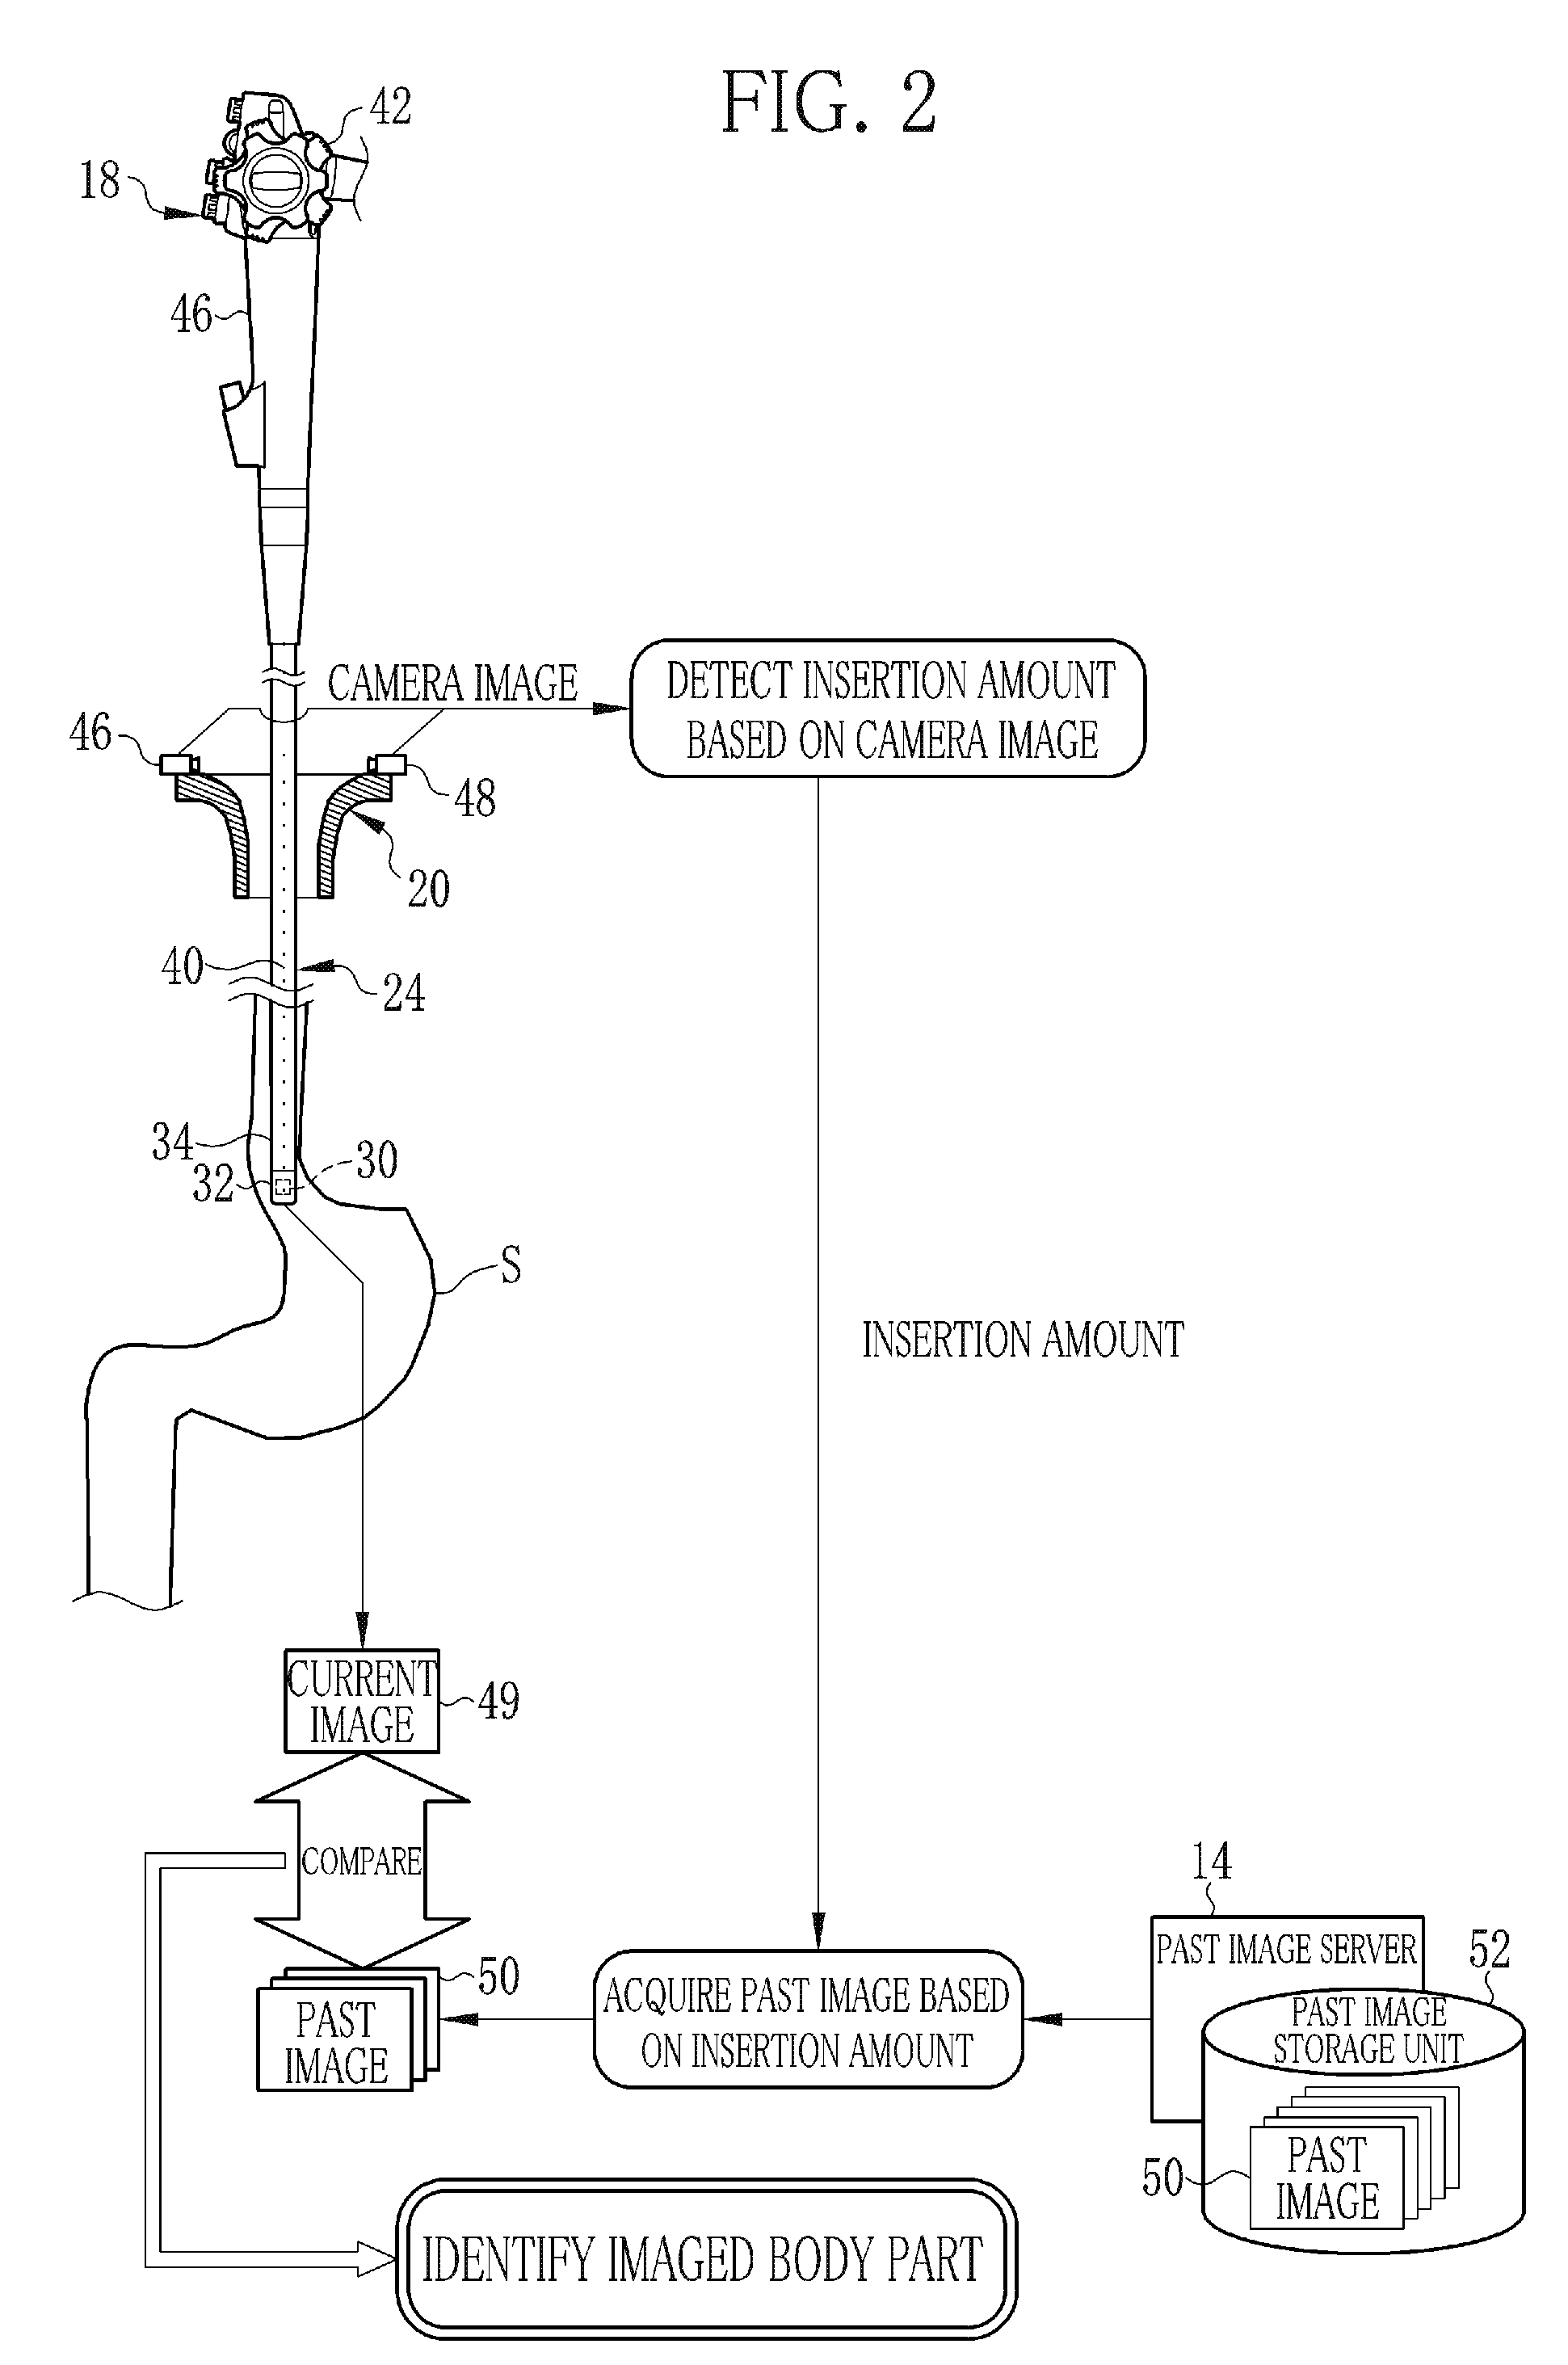 Device, method, and non-transitory computer-readable medium for identifying body part imaged by endoscope